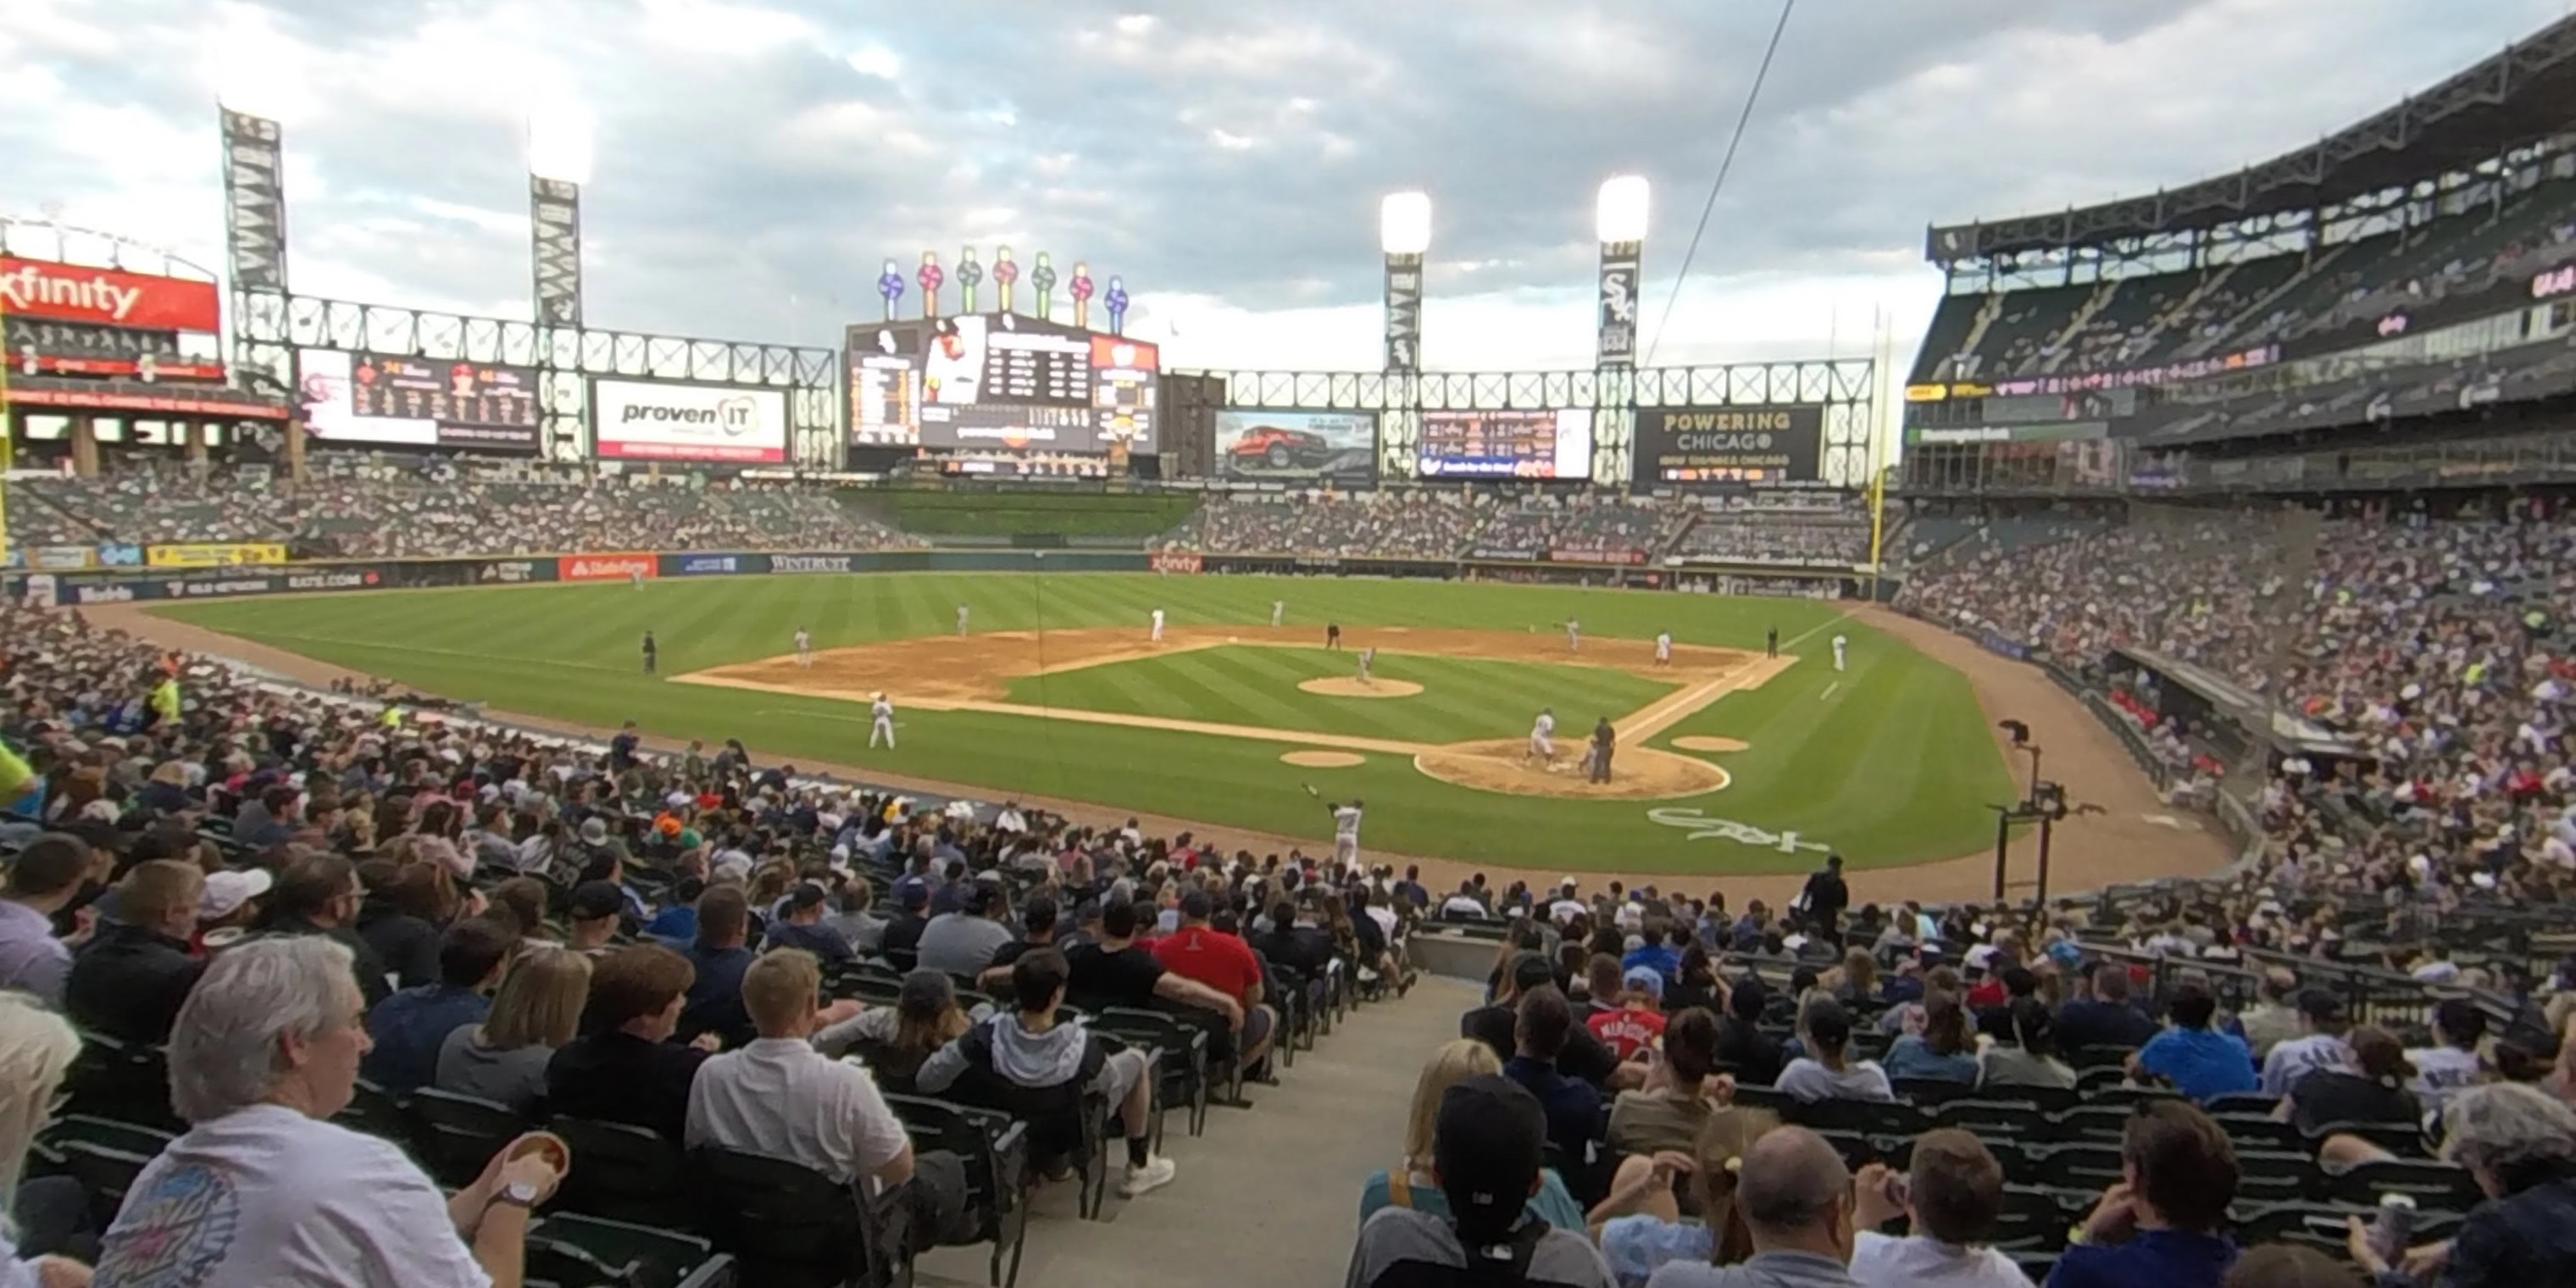 section 134 panoramic seat view  - guaranteed rate field